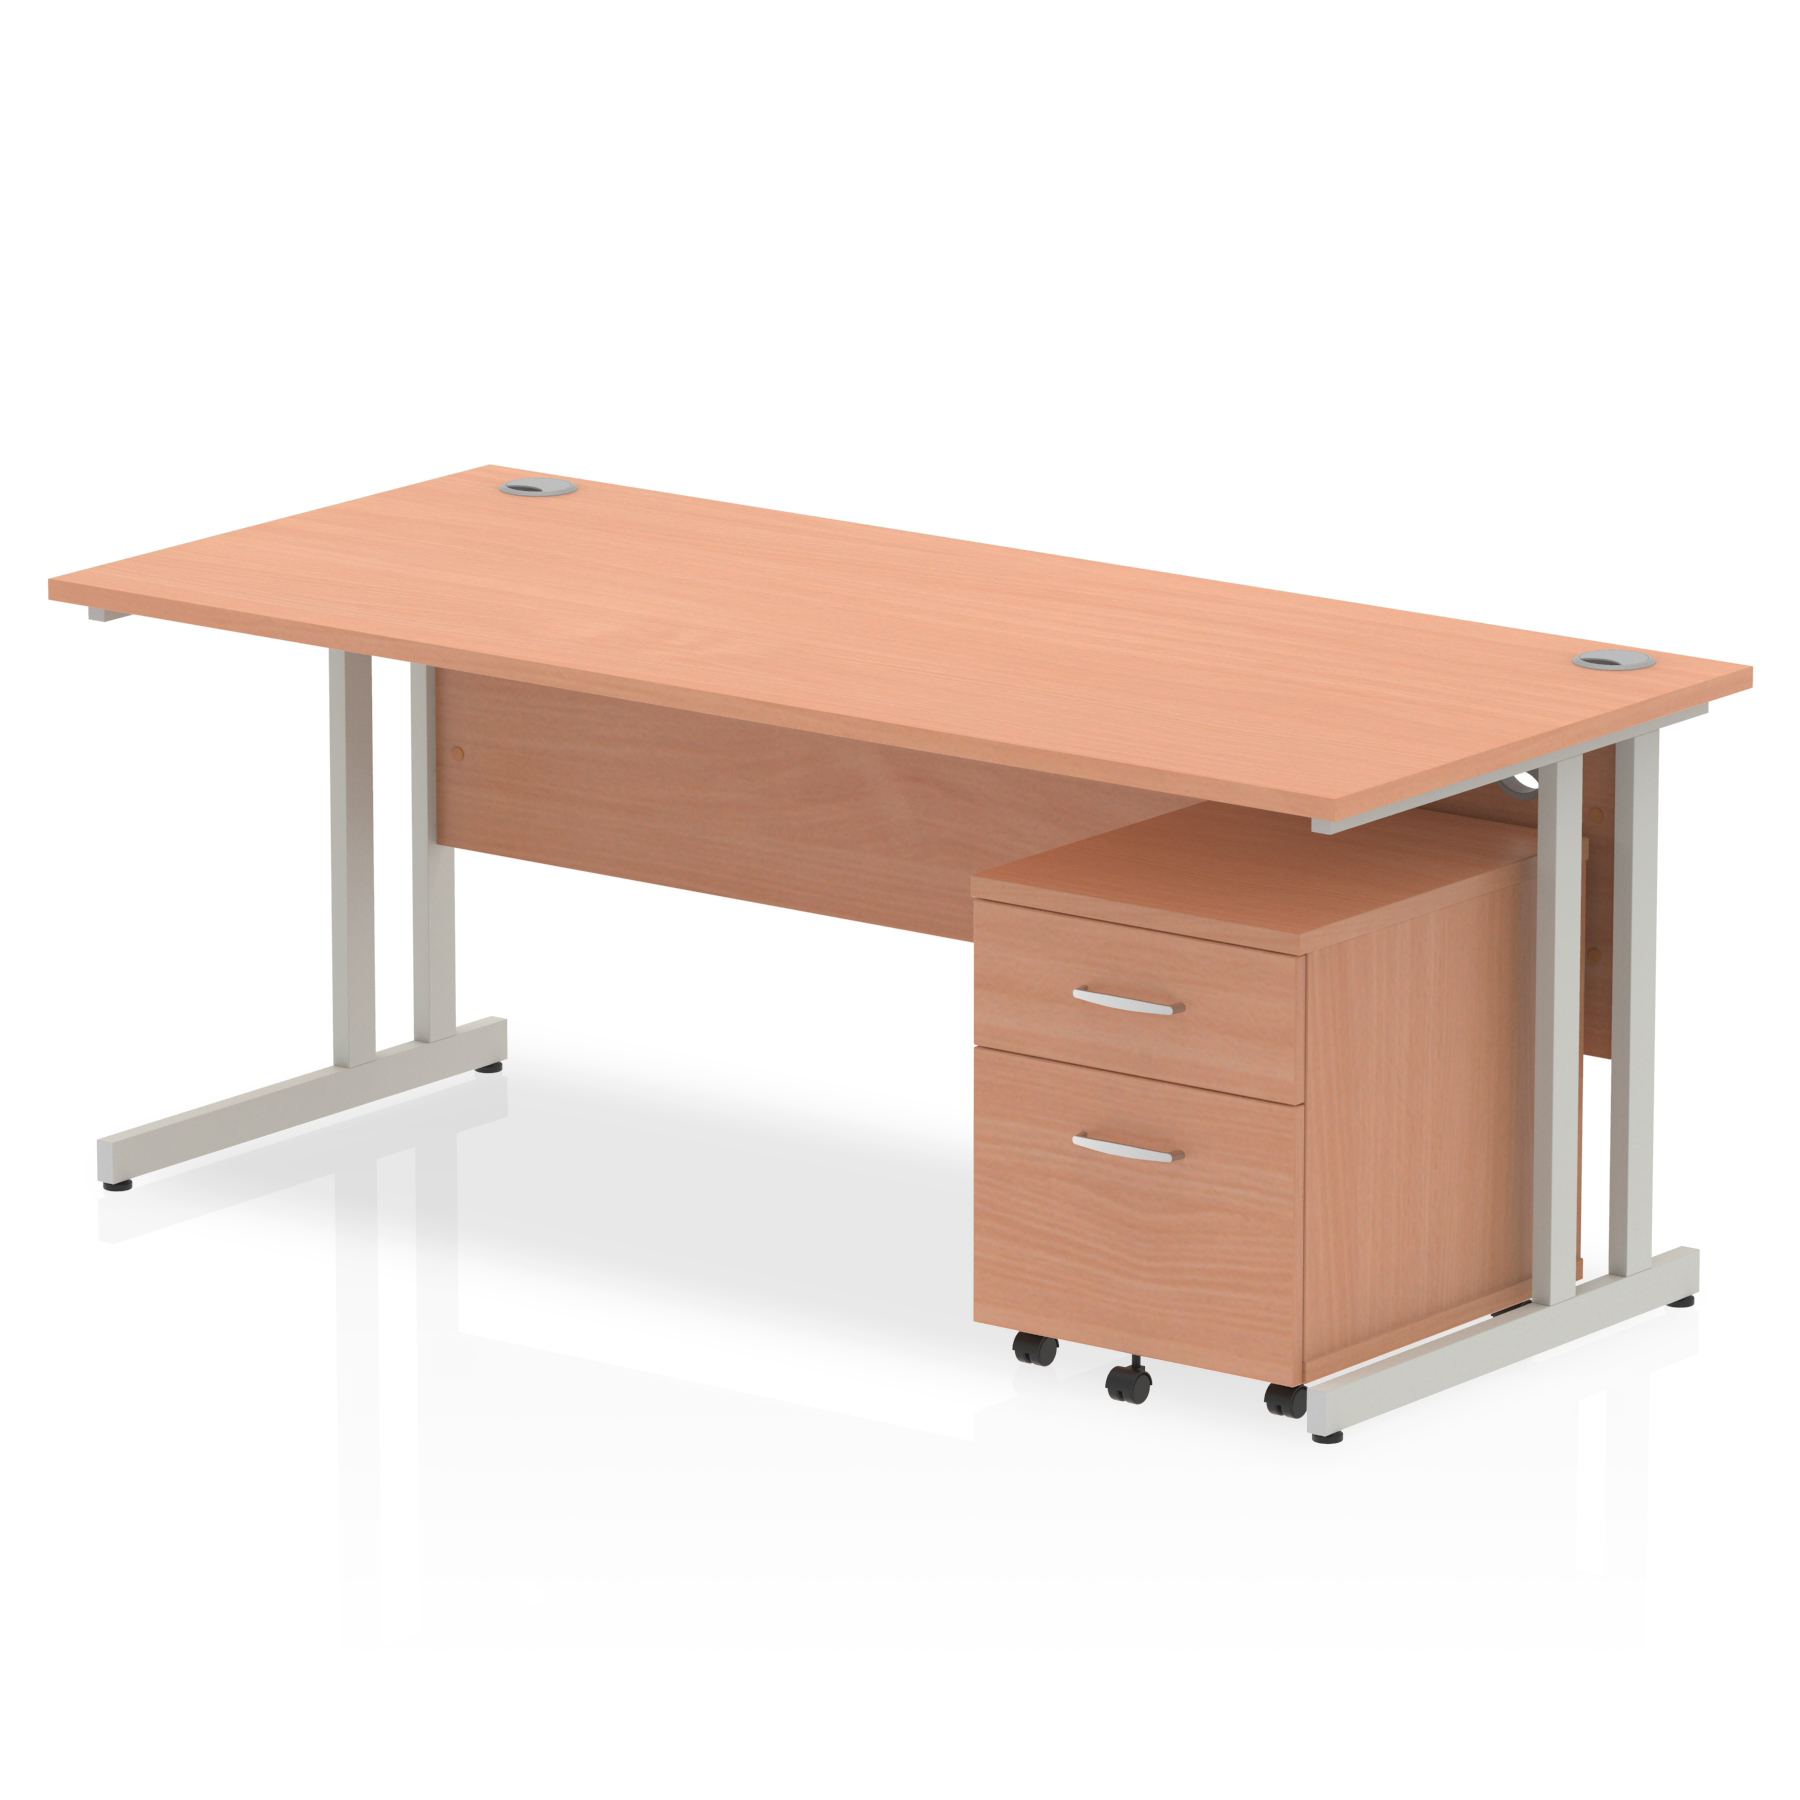 Impulse 1800 x 800mm Straight Desk Beech Top Silver Cantilever Leg with 2 Drawer Mobile Pedestal